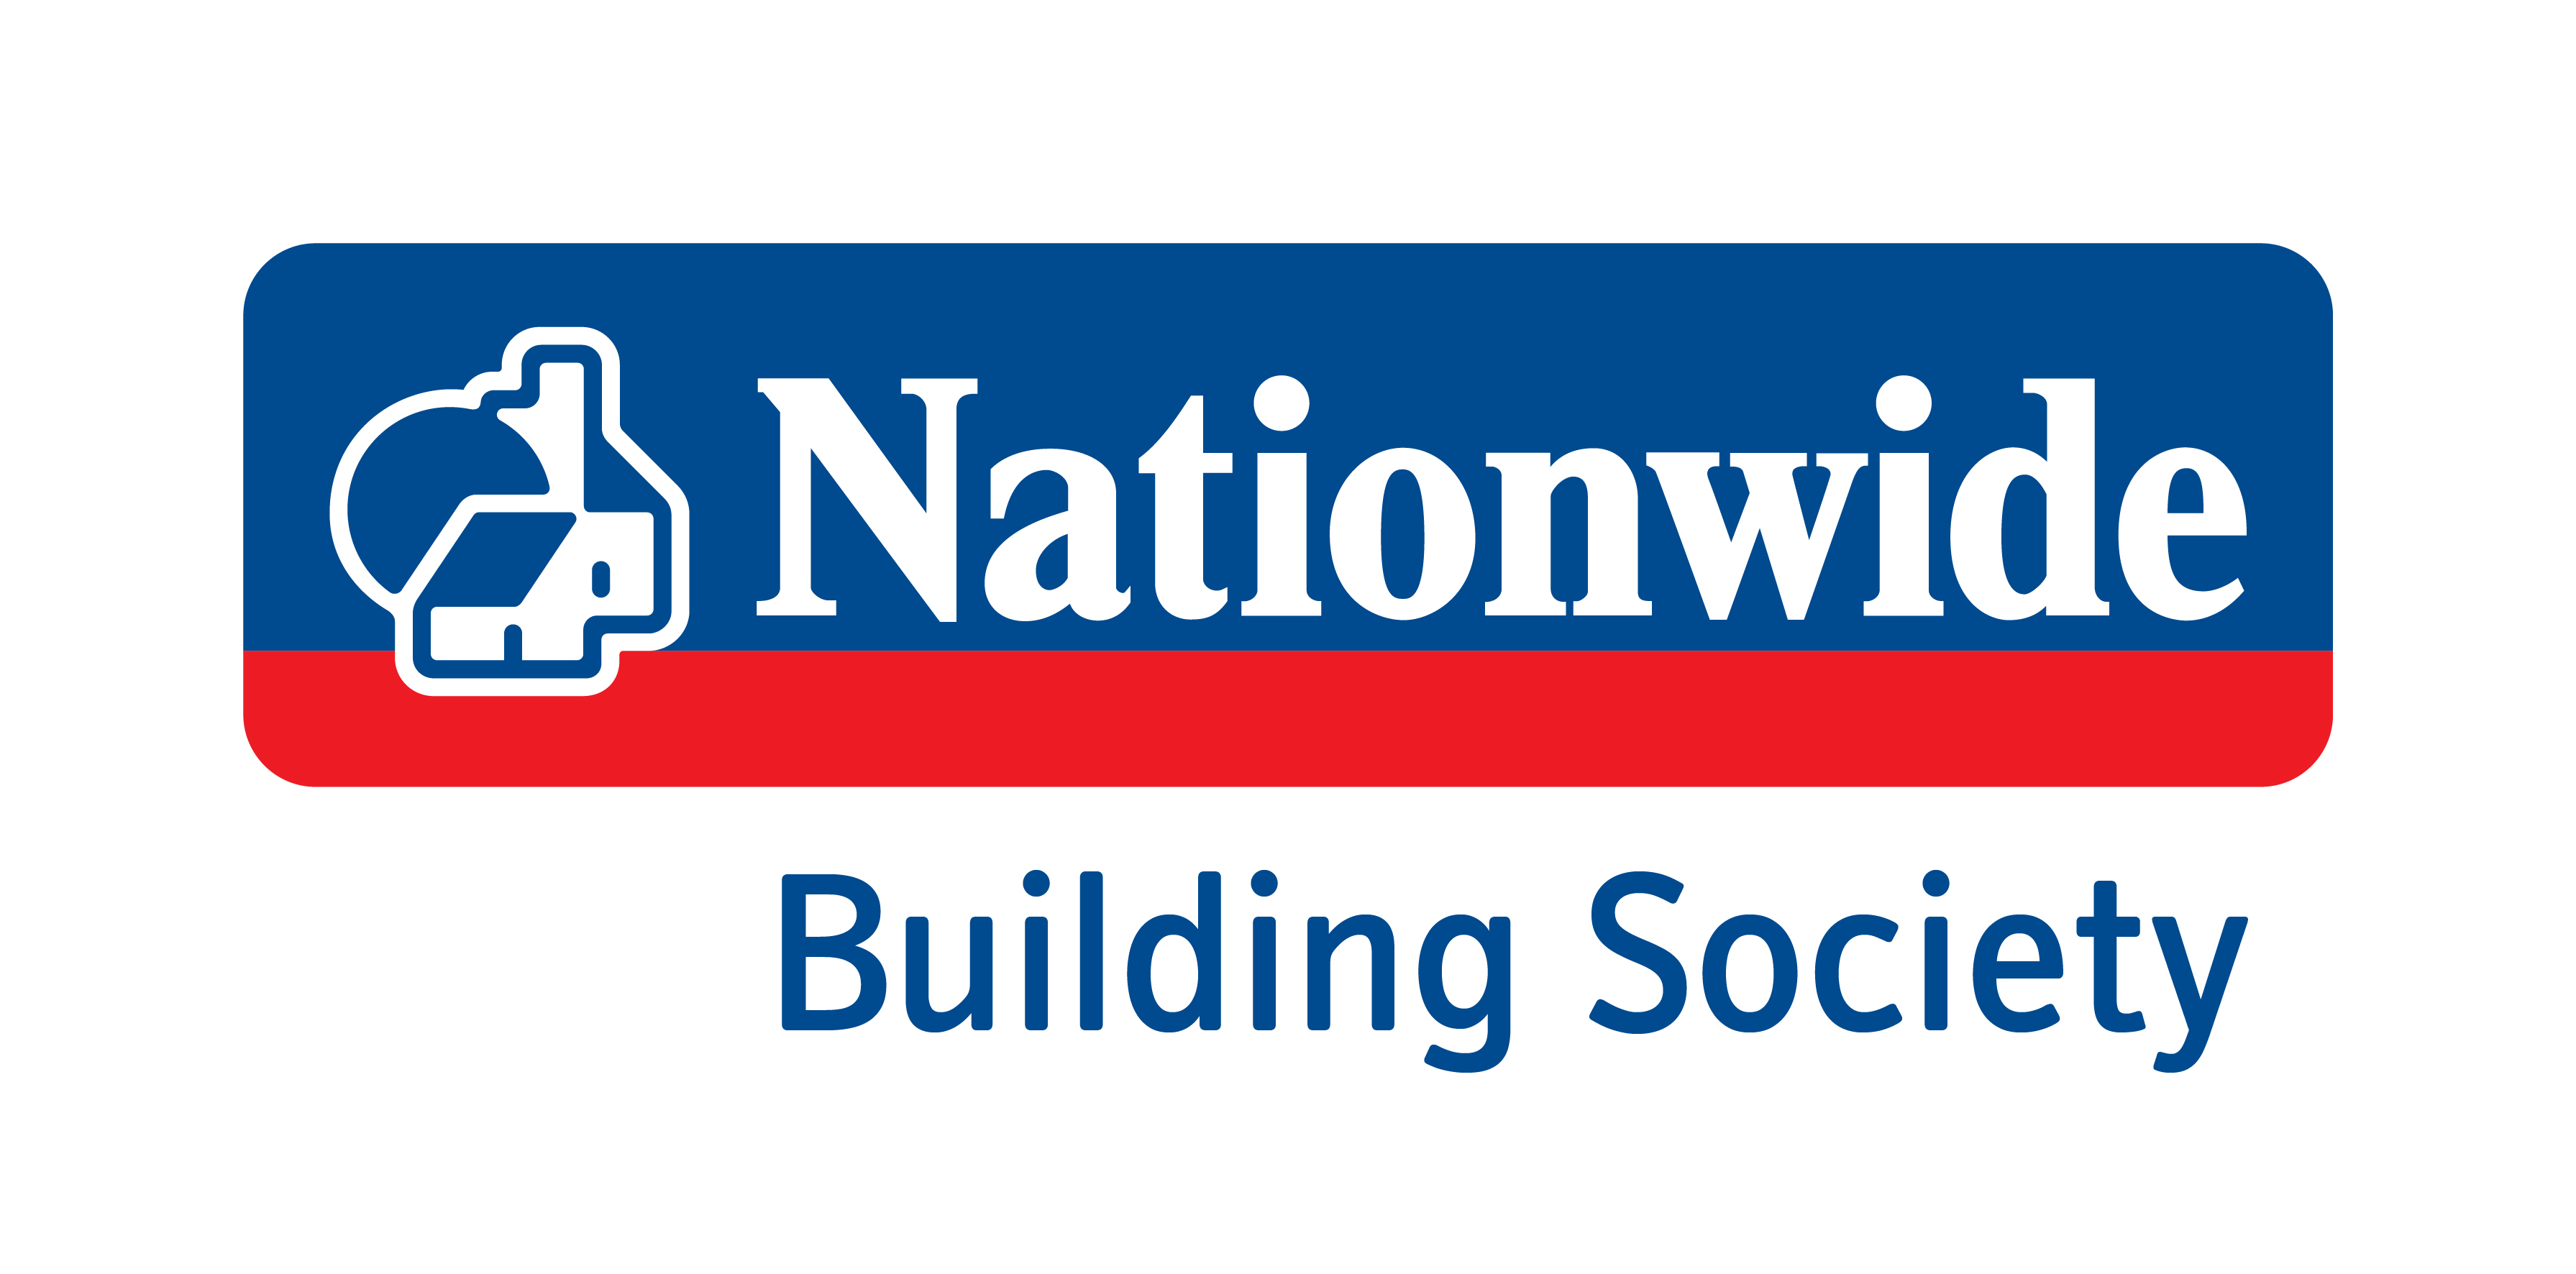 Nationwide introduces 1.19% remortgage rate for mortgages between £300,000 and £1 million